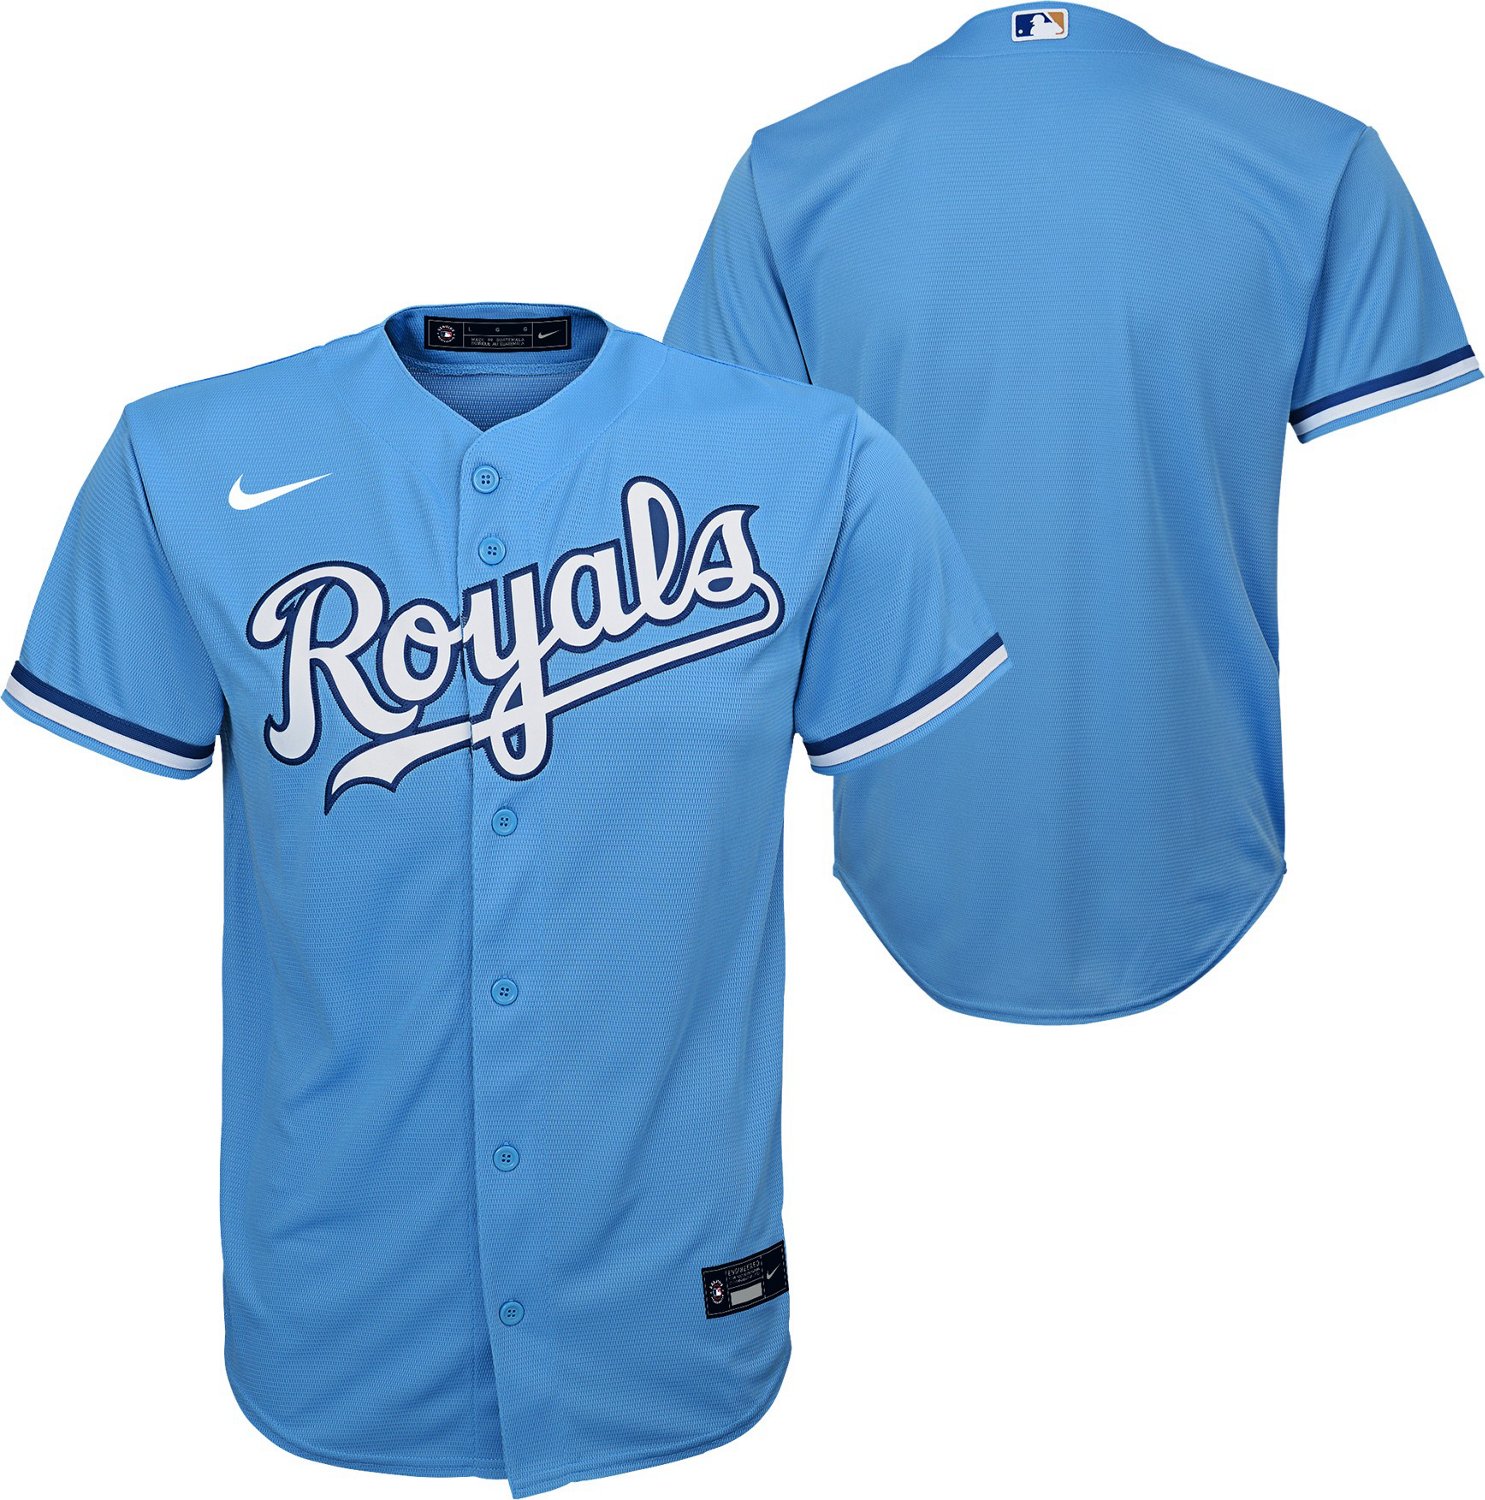 Kansas+City+Royals+Jersey+Youth+Large+14%2F16+MLB+Genuine+Merchandise for  sale online